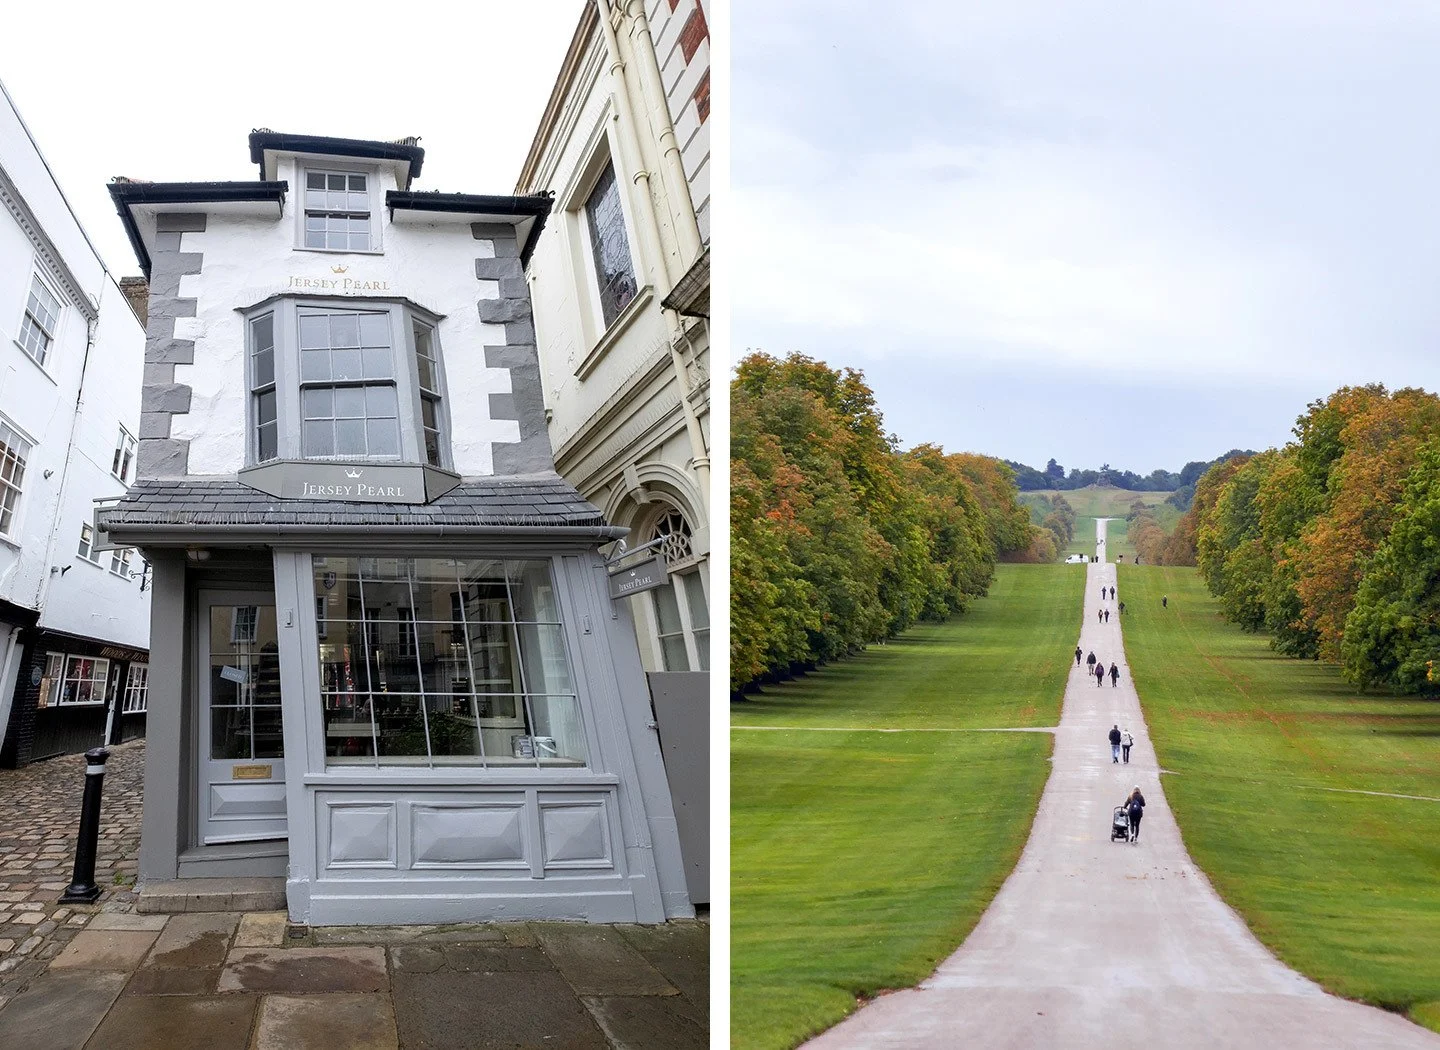 A quirky crooked house and the Long Walk in Windsor Great Park